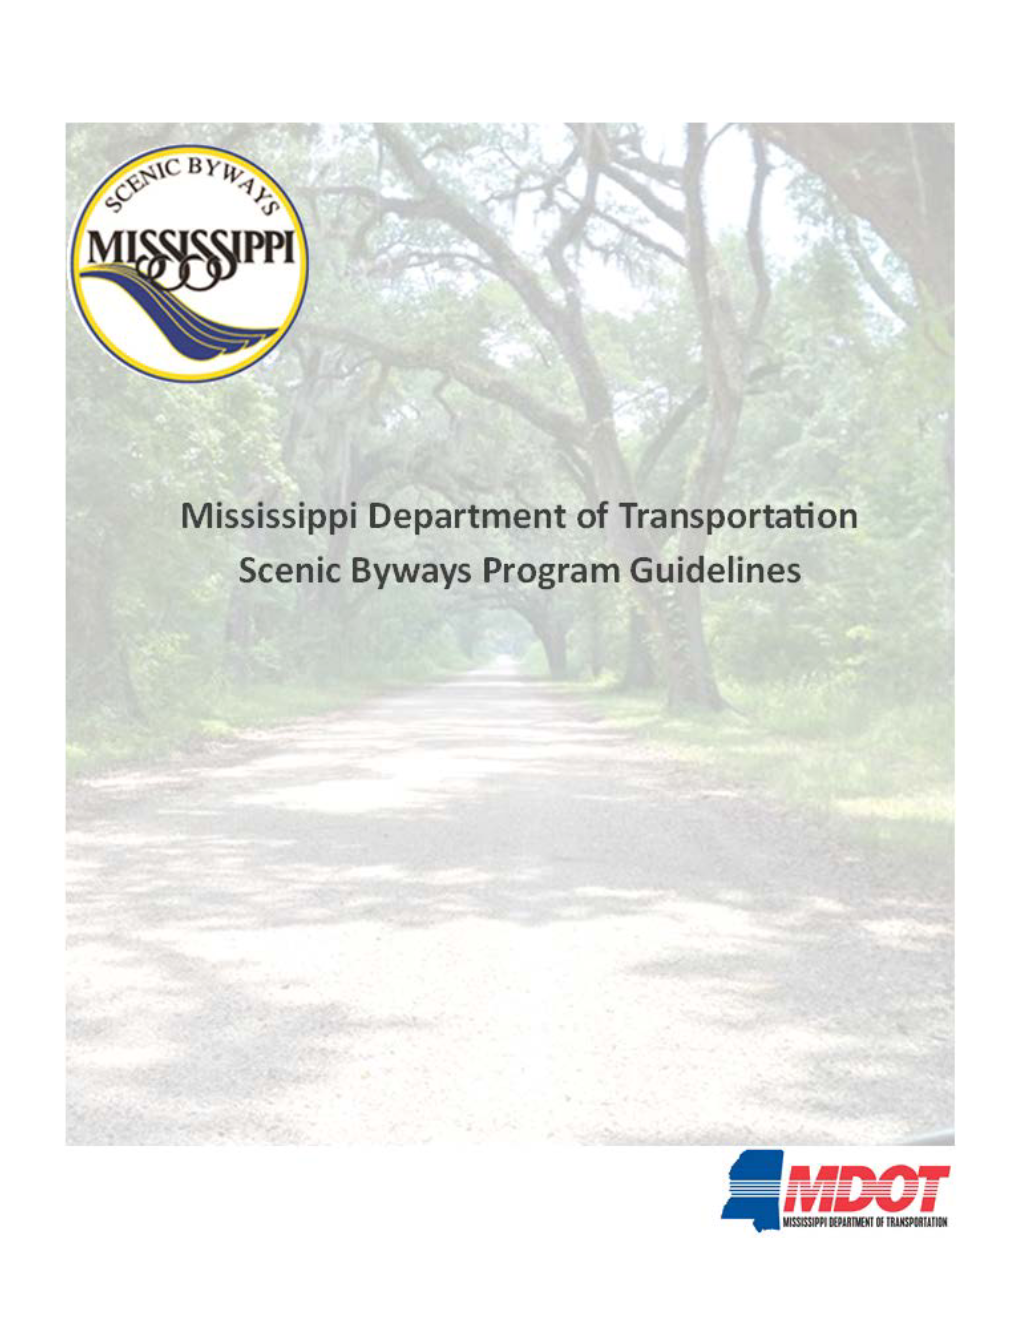 Scenic Byways Guidelines Created by MDOT to Guide an Applicant Seeking Designation for a Roadway As a Mississippi Scenic Byway